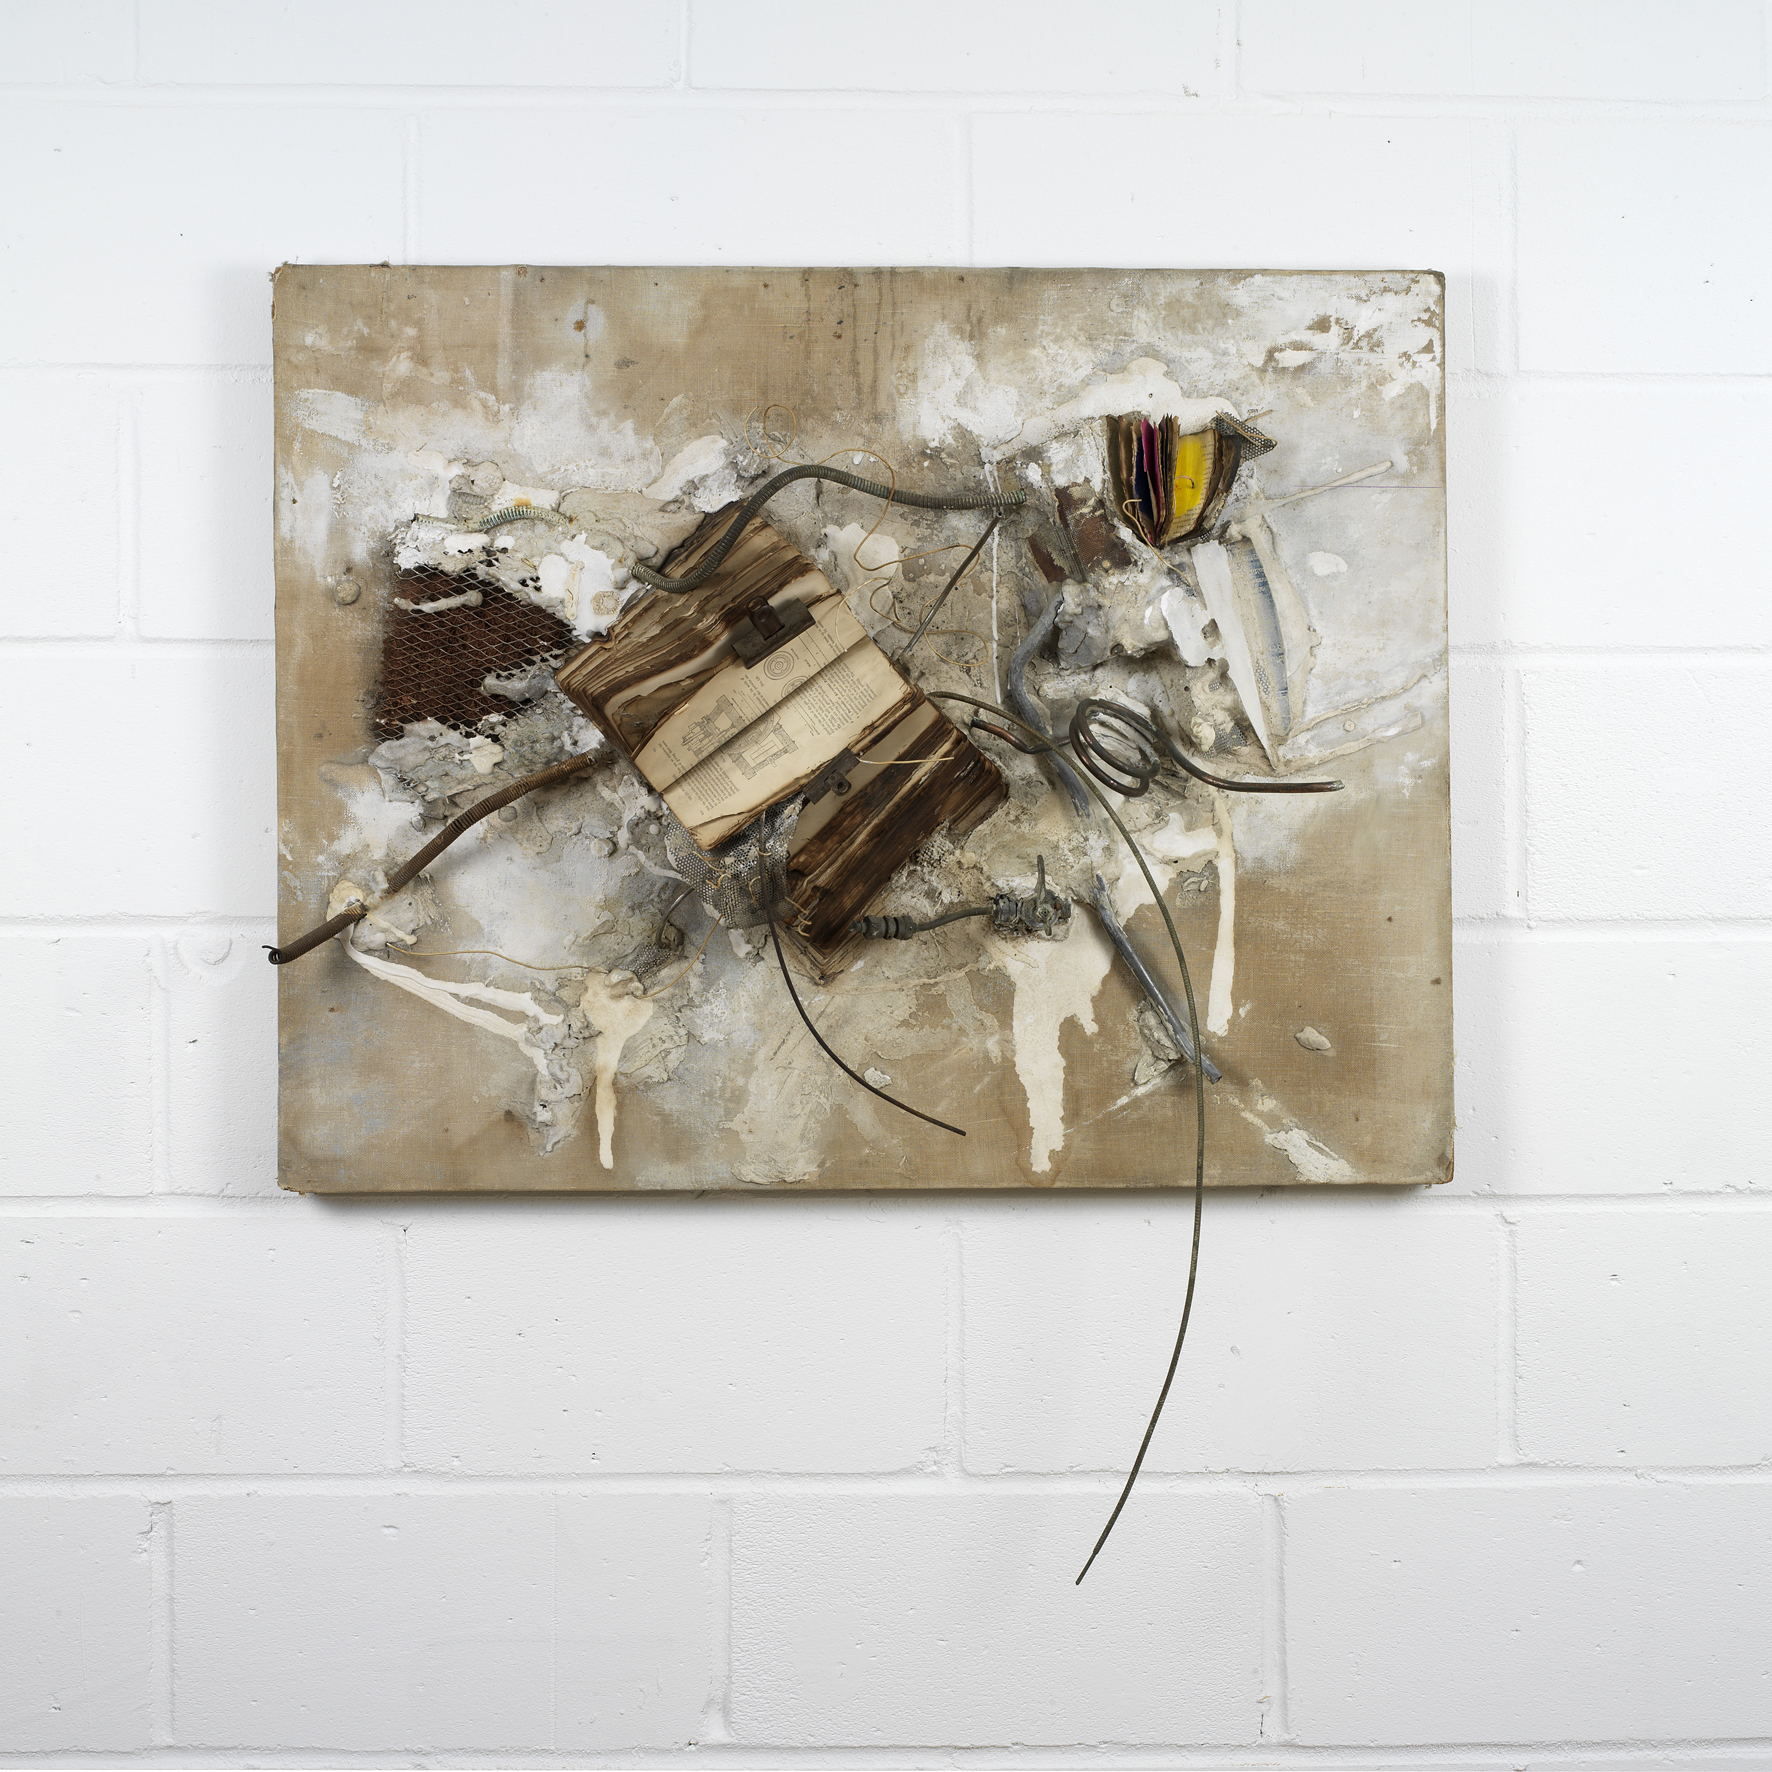 Philosophy and the practice of (1960) Singed and painted books, metal rust, clips, copper tubes, electrical wires, wire-mesh, electrical instrument panel, plaster on canvas and hardboard. Photo: Ken Adlard (Distress of a Dictionary 4)